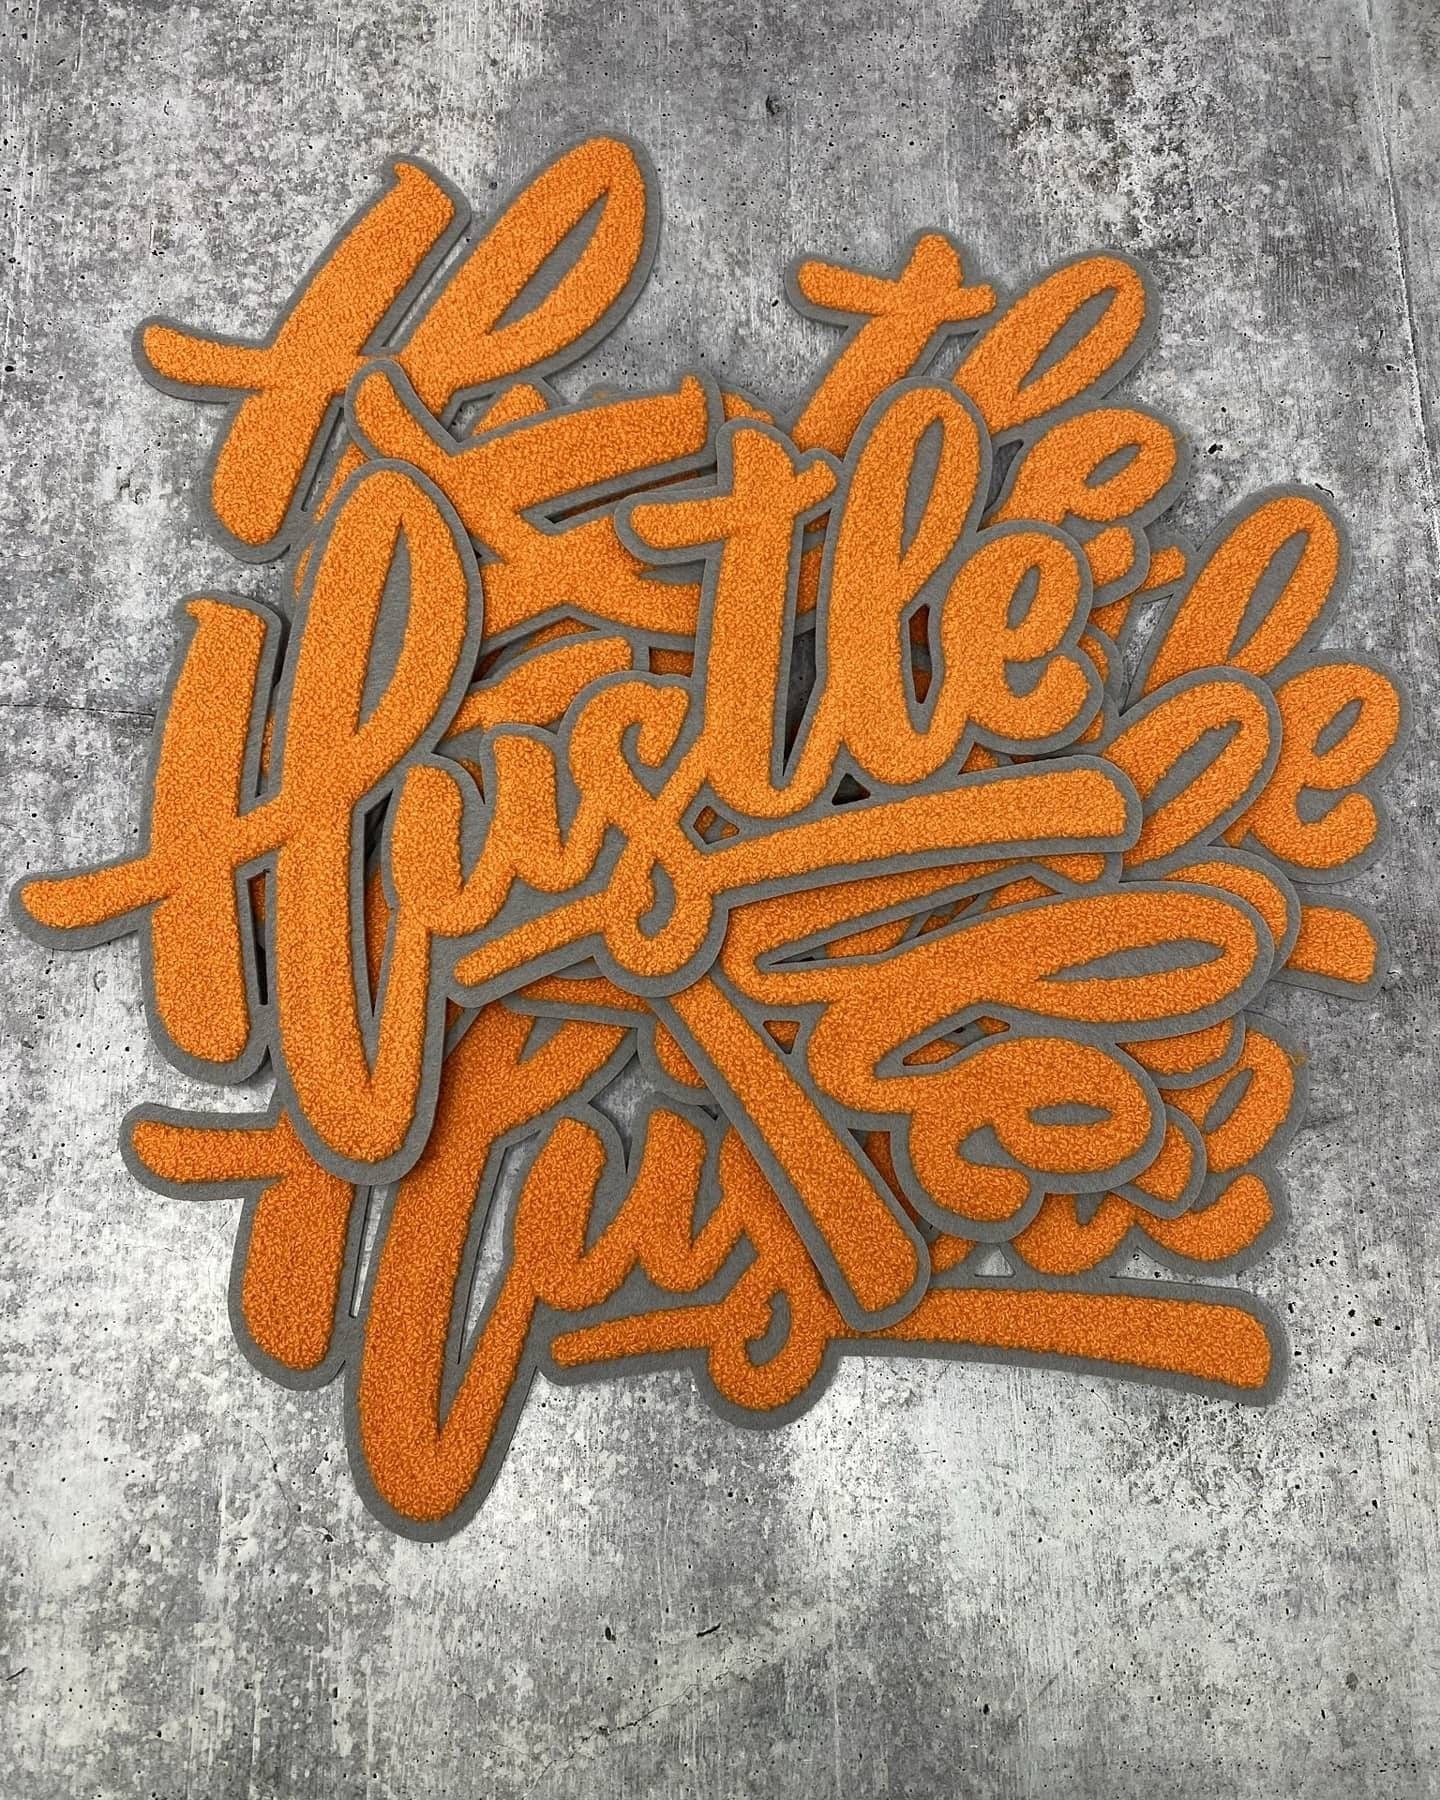 Exclusive, Orange & Gray "Hustle" Chenille Patch (iron-on) Size 10"x8", Varsity Patch for Denim Jacket, Shirts and Hoodies, Large Patch